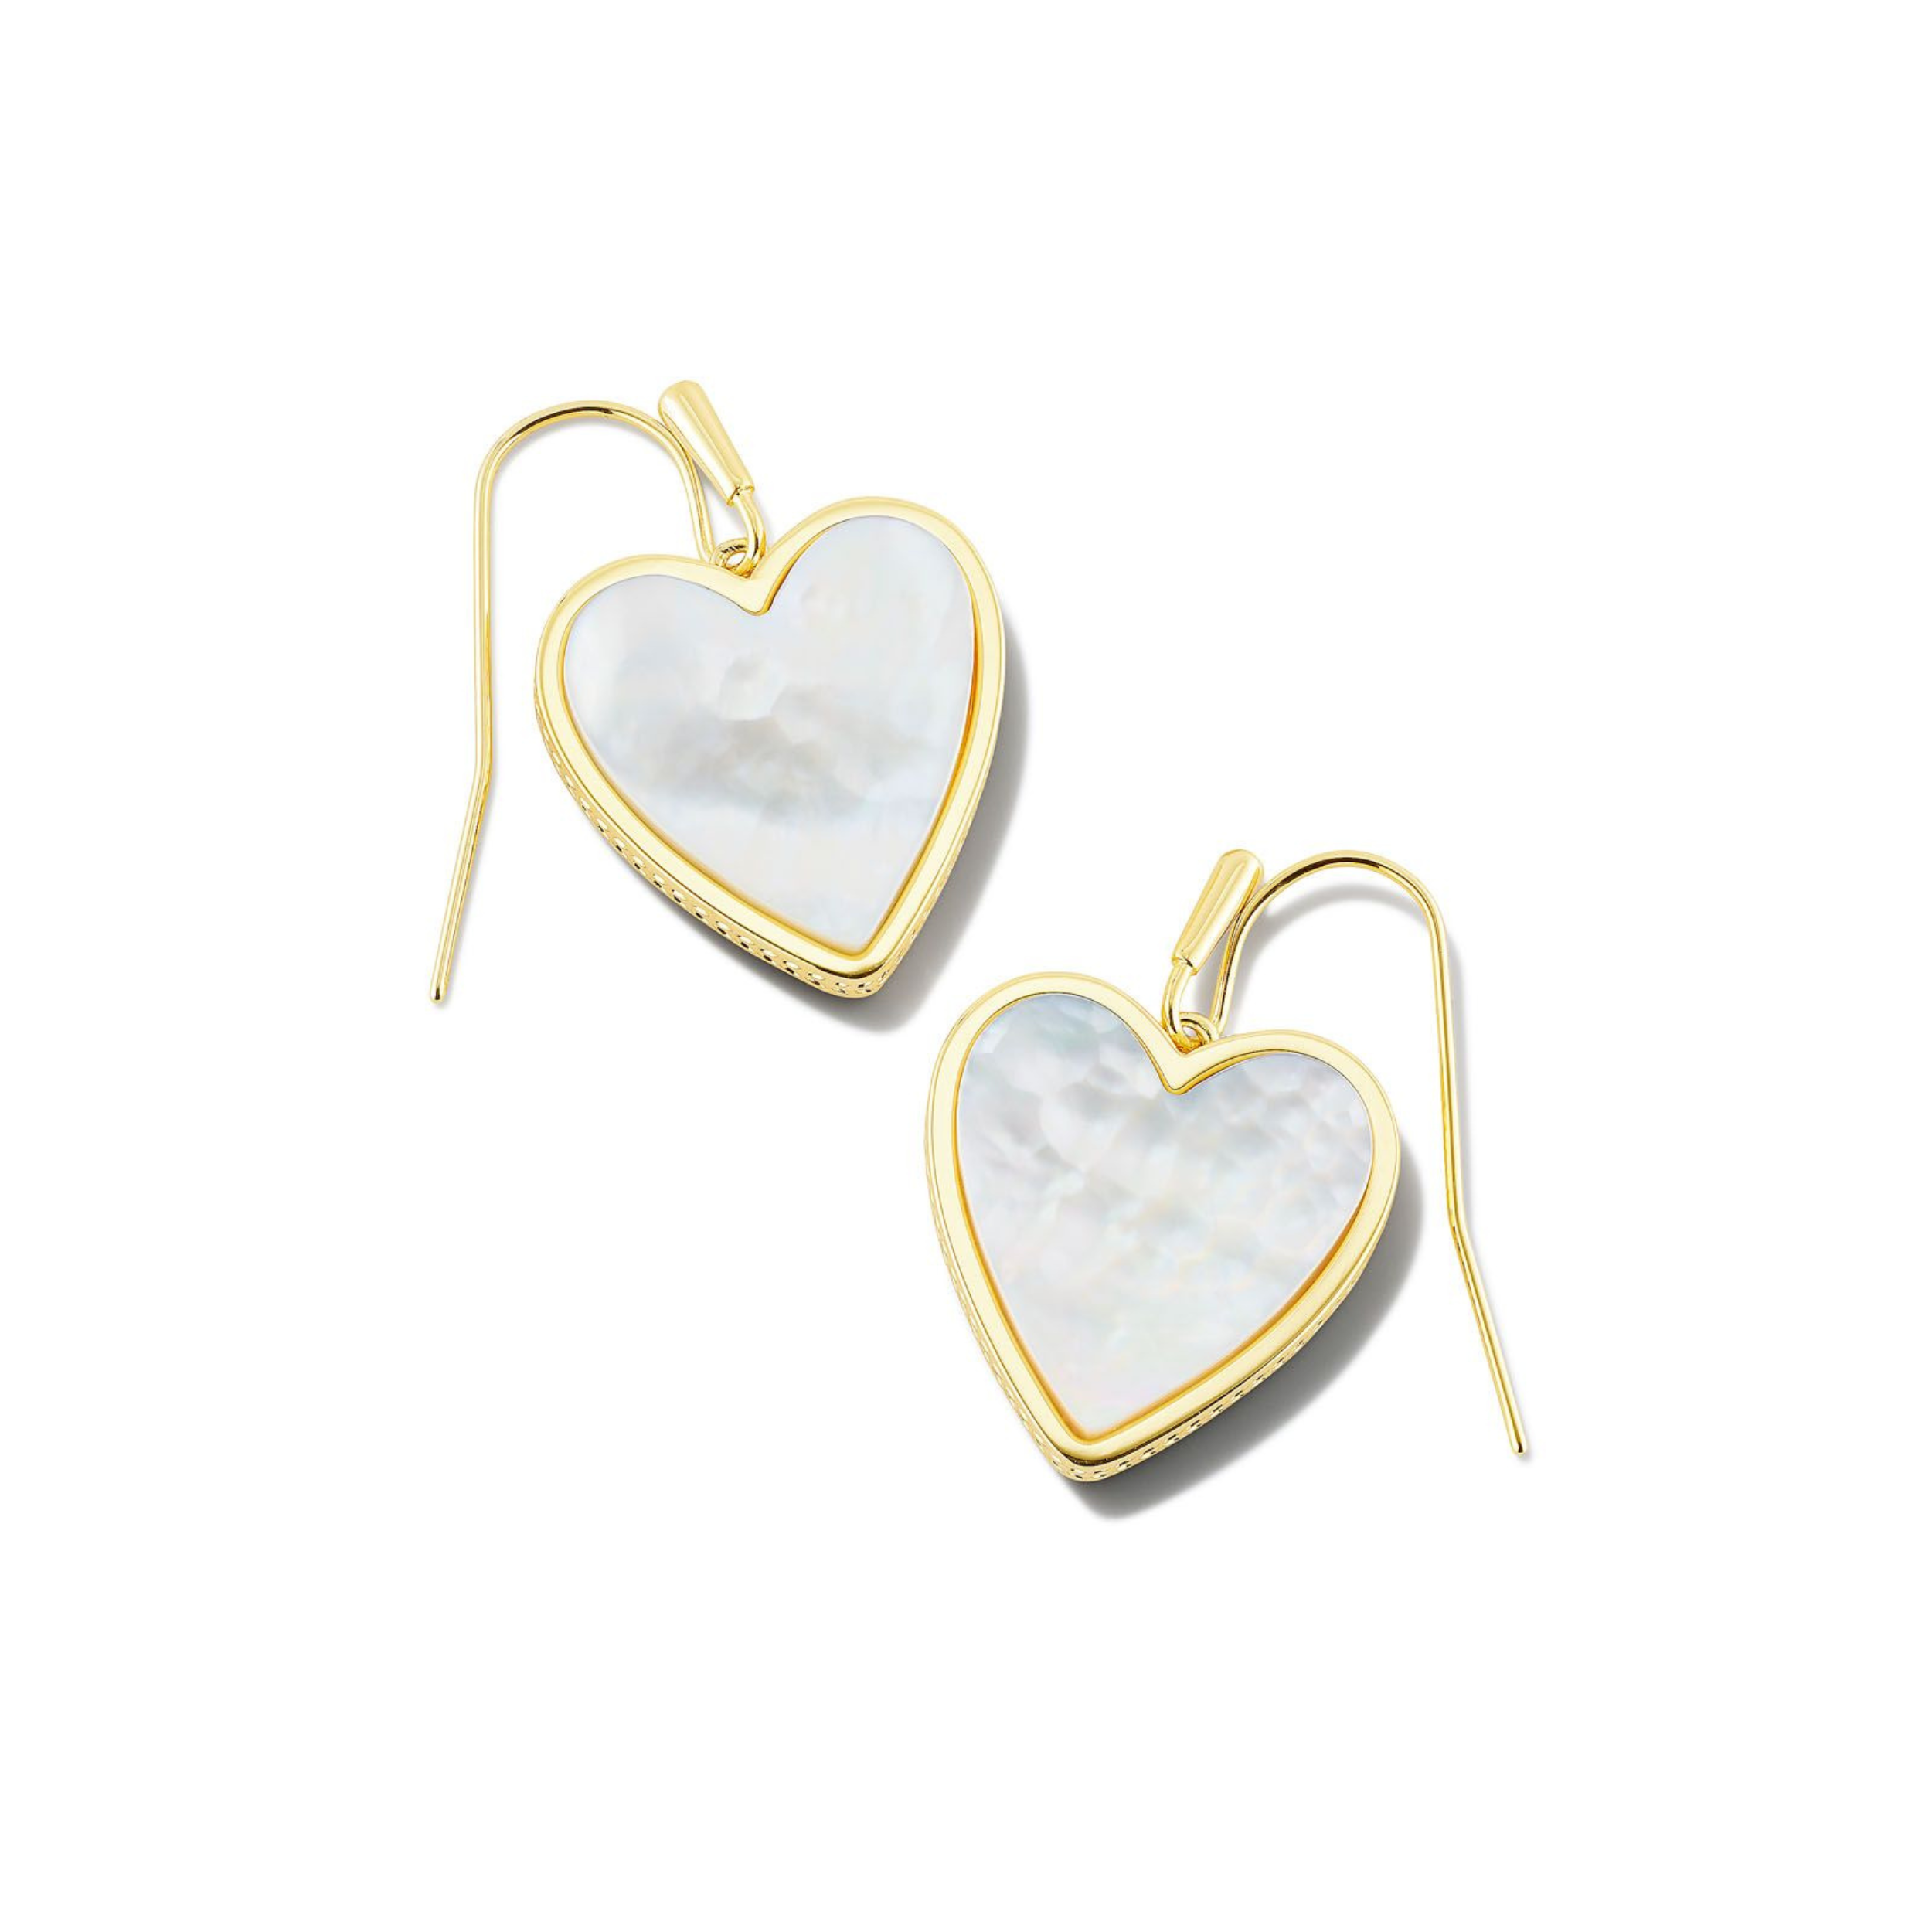 Kendra Scott | Heart Gold Drop Earrings in Ivory Mother-of-Pearl - Giddy Up Glamour Boutique